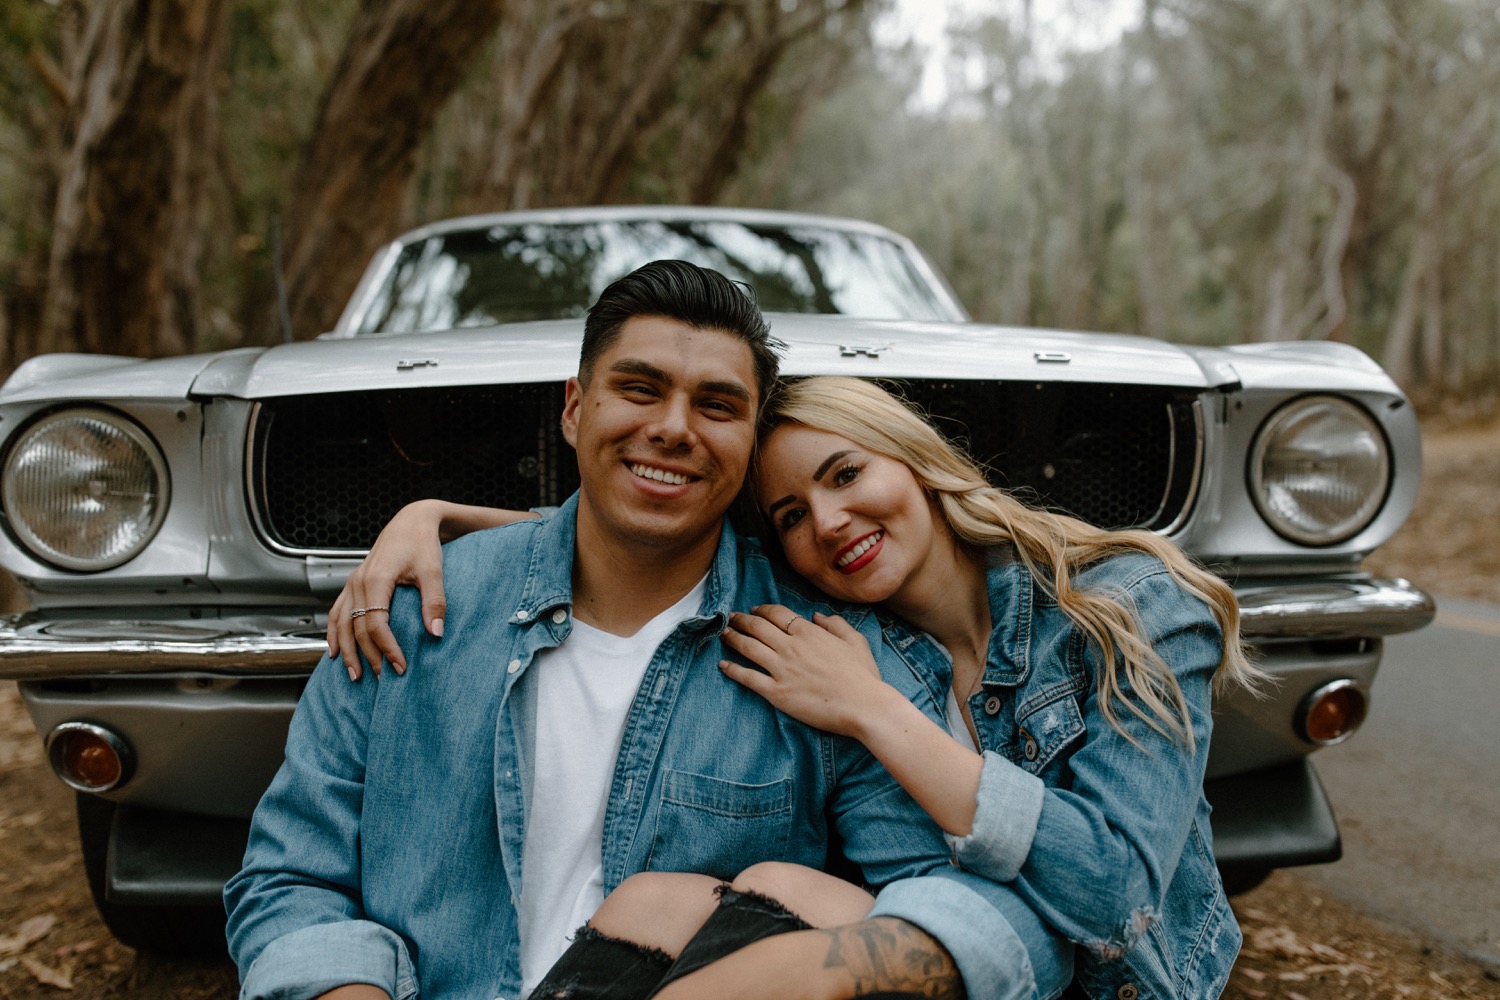 Free Photos - A Man And A Woman Standing Together In A Car Showroom. They  Are Smiling And Hugging Each Other Close, Conveying A Sense Of Affection  And Happiness. The Couple Is